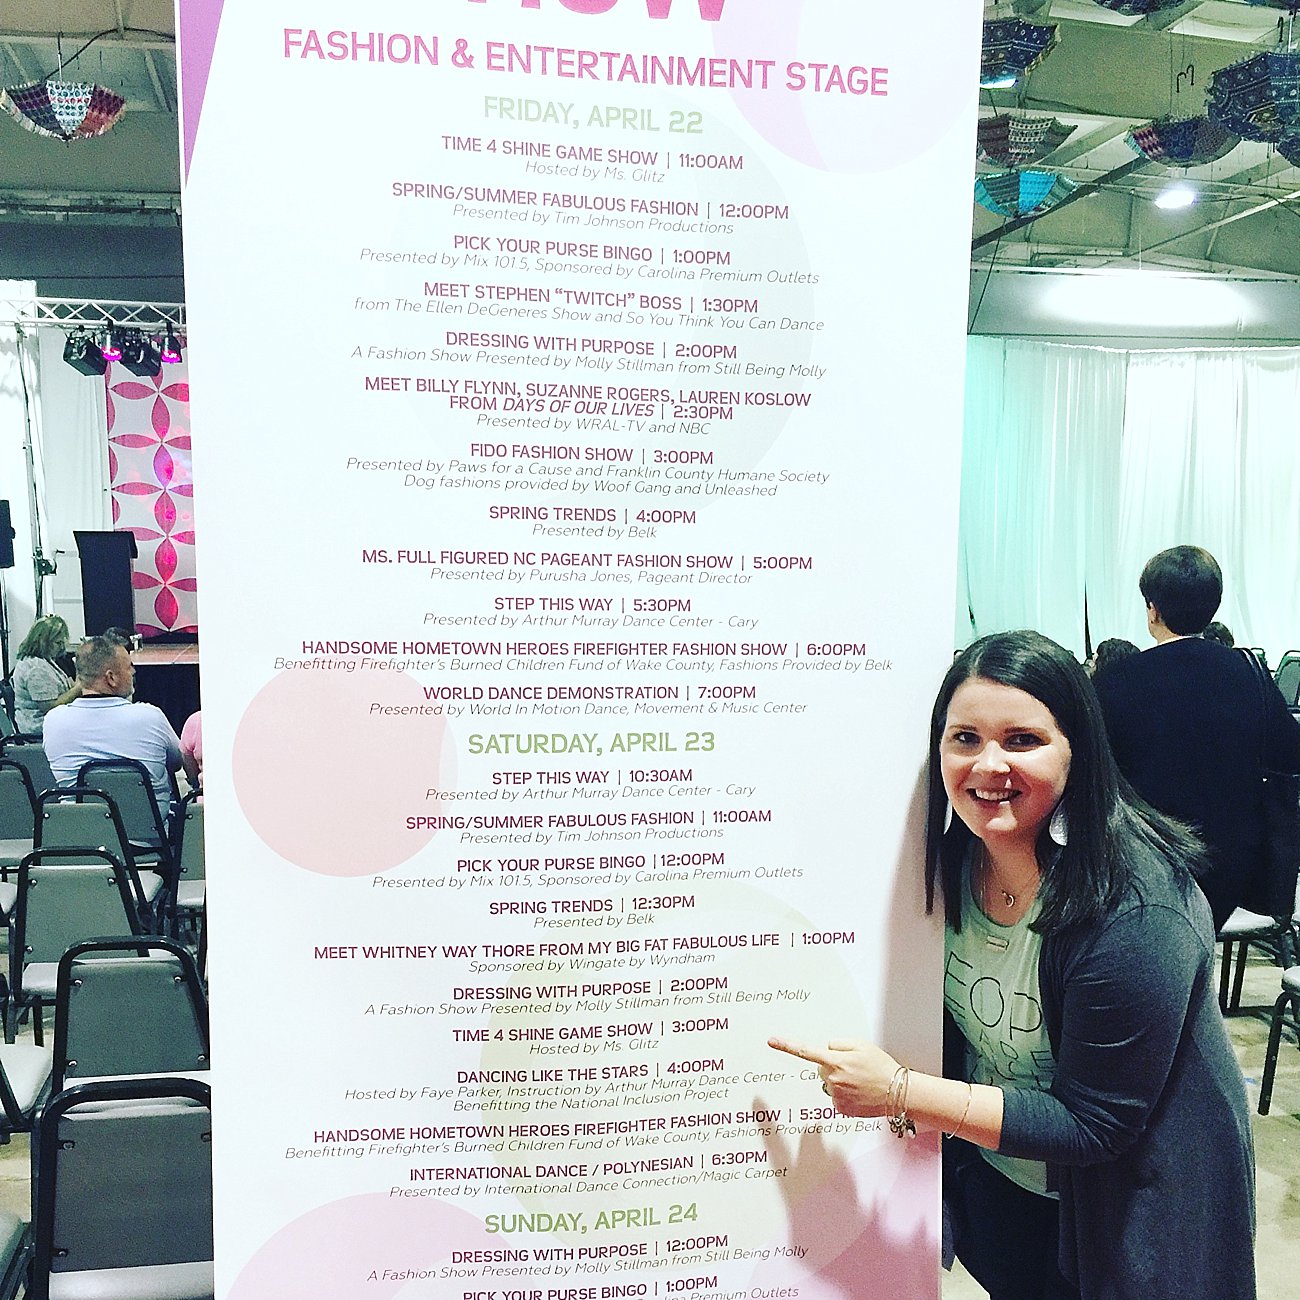 "Dressing with Purpose" Ethical Fashion Show at the Southern Women's Show in Raleigh, North Carolina 2016 | triFABB and Still Being Molly | North Carolina Fashion & Style Blogger (6)